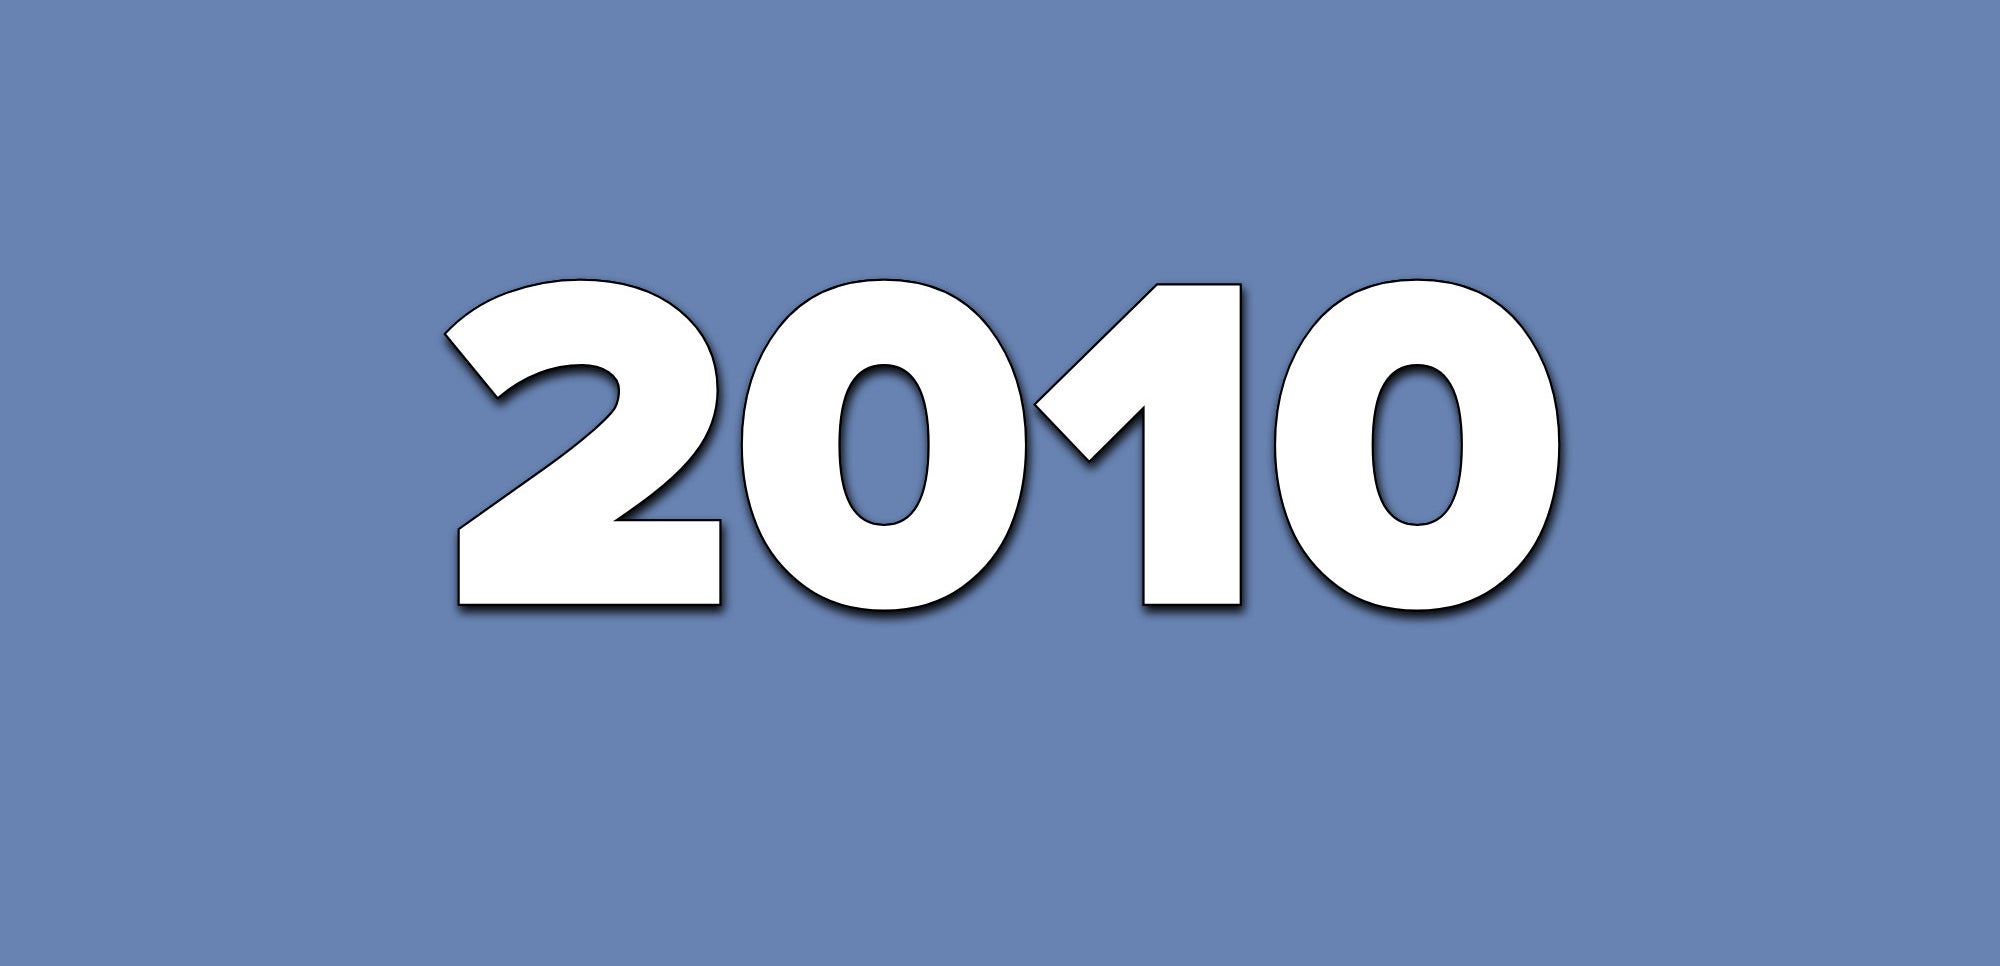 A blue background with text that says 2010